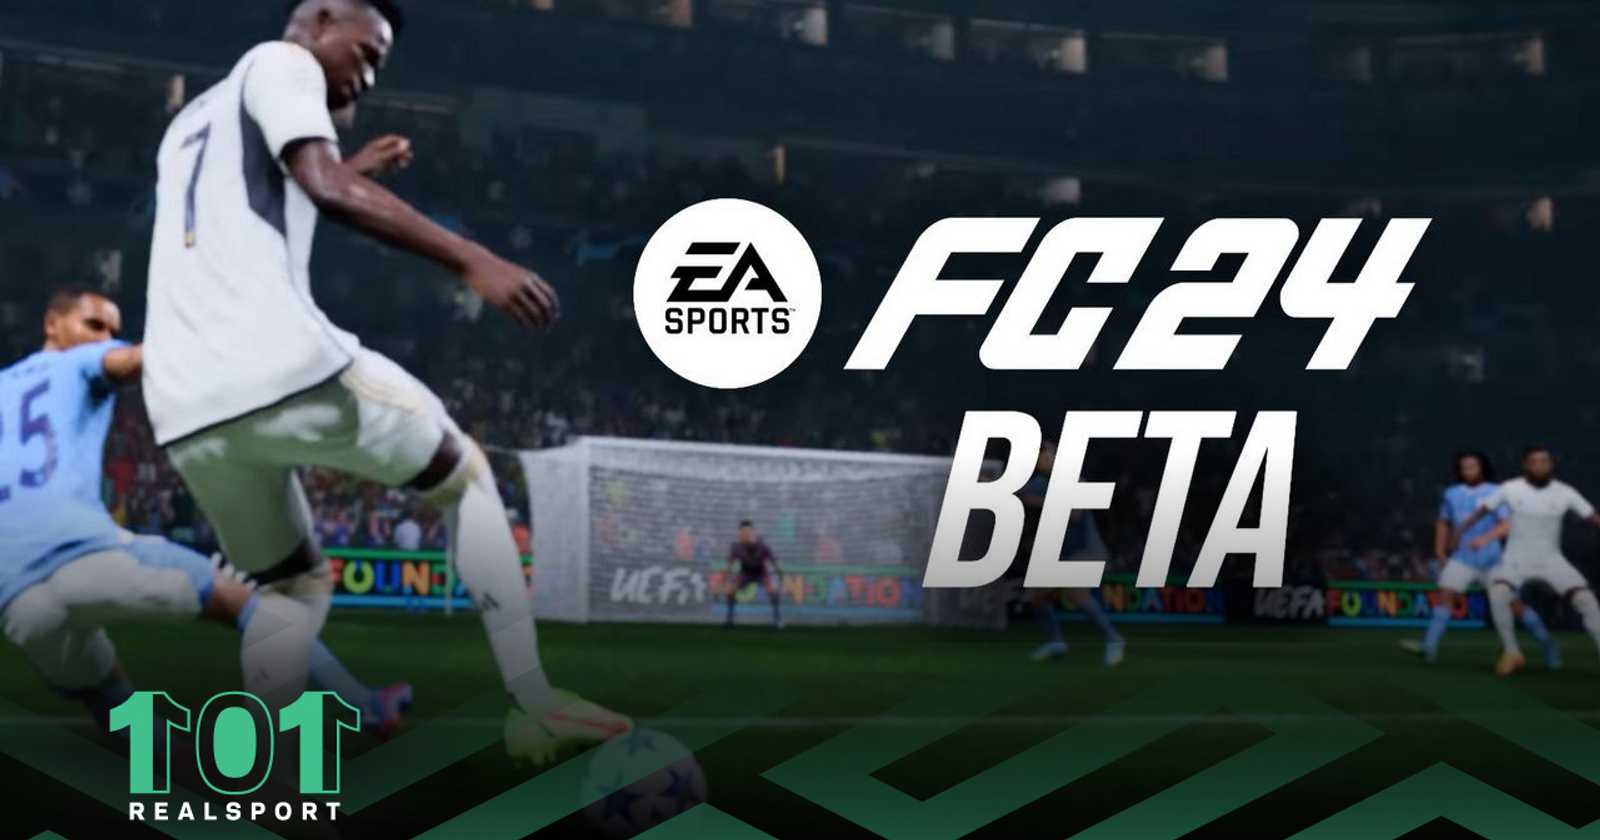 After a limited test, EA launches FIFA World open beta on PC worldwide -  GameSpot